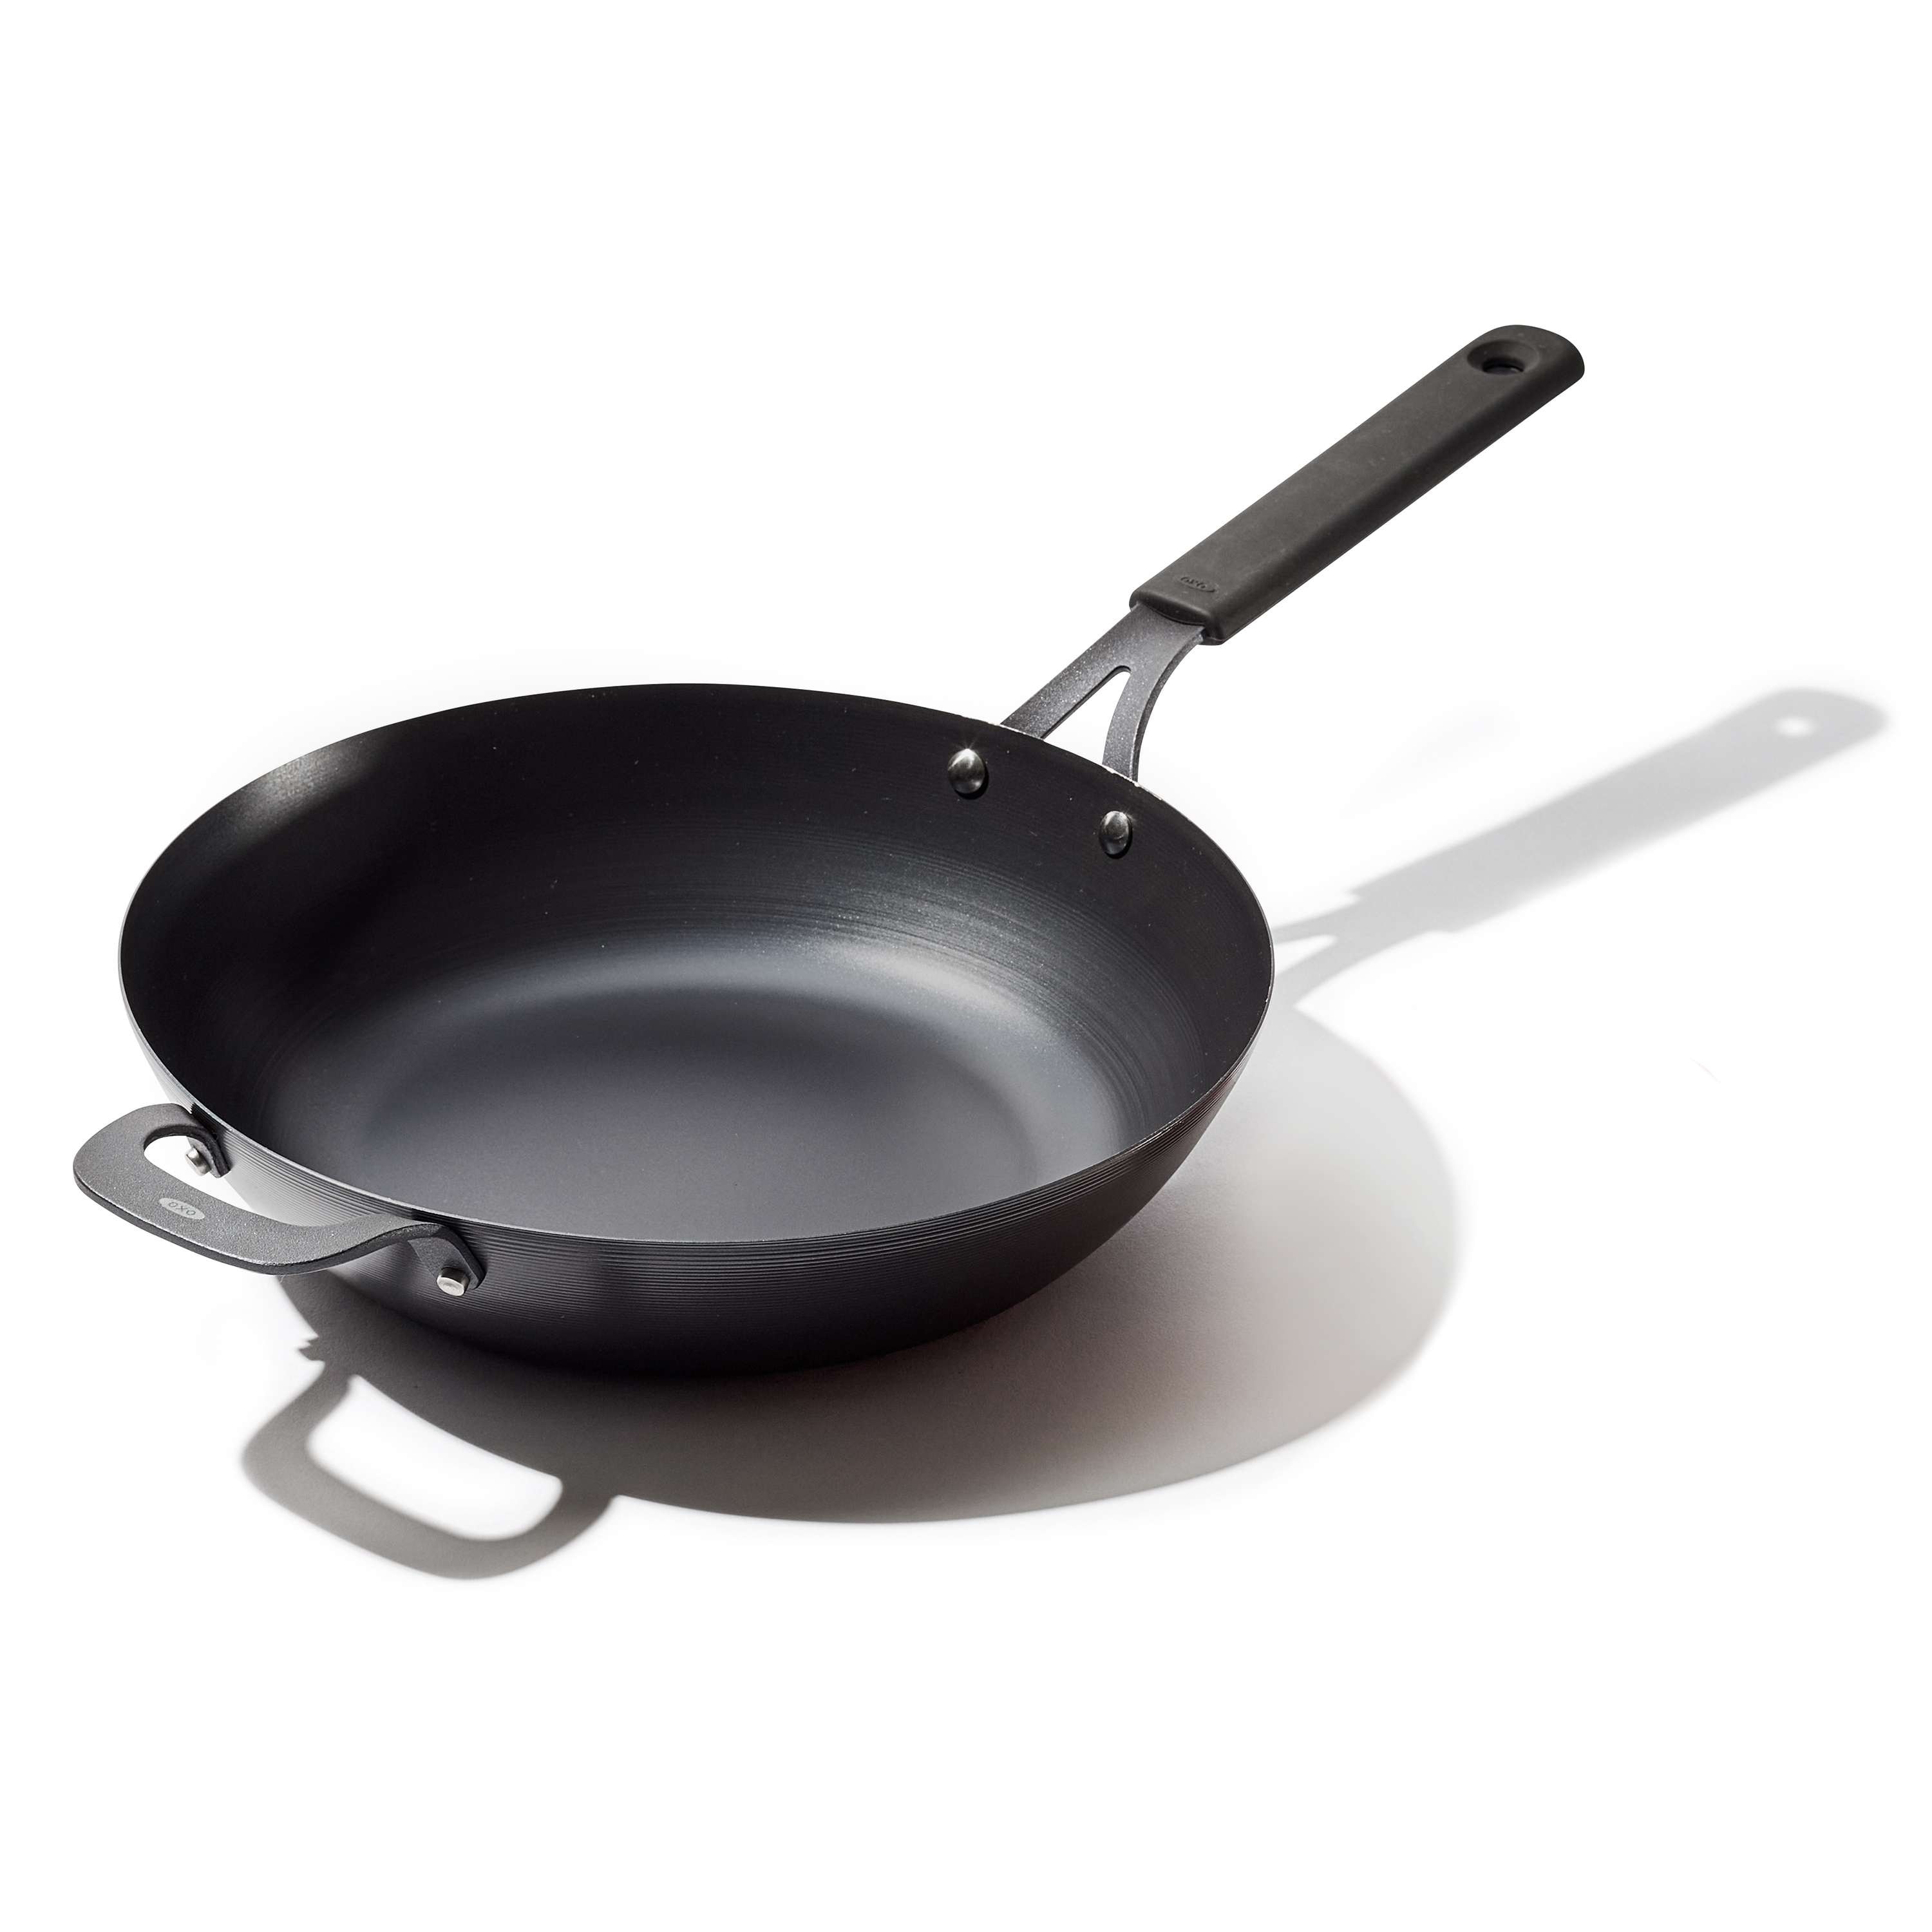 https://ak1.ostkcdn.com/images/products/is/images/direct/4e54ab4b813563542ad1aac10831b3d808571728/OXO-Black-Steel-12%22-Wok-with-Helper-Handle-%26-Silicone-Sleeve.jpg